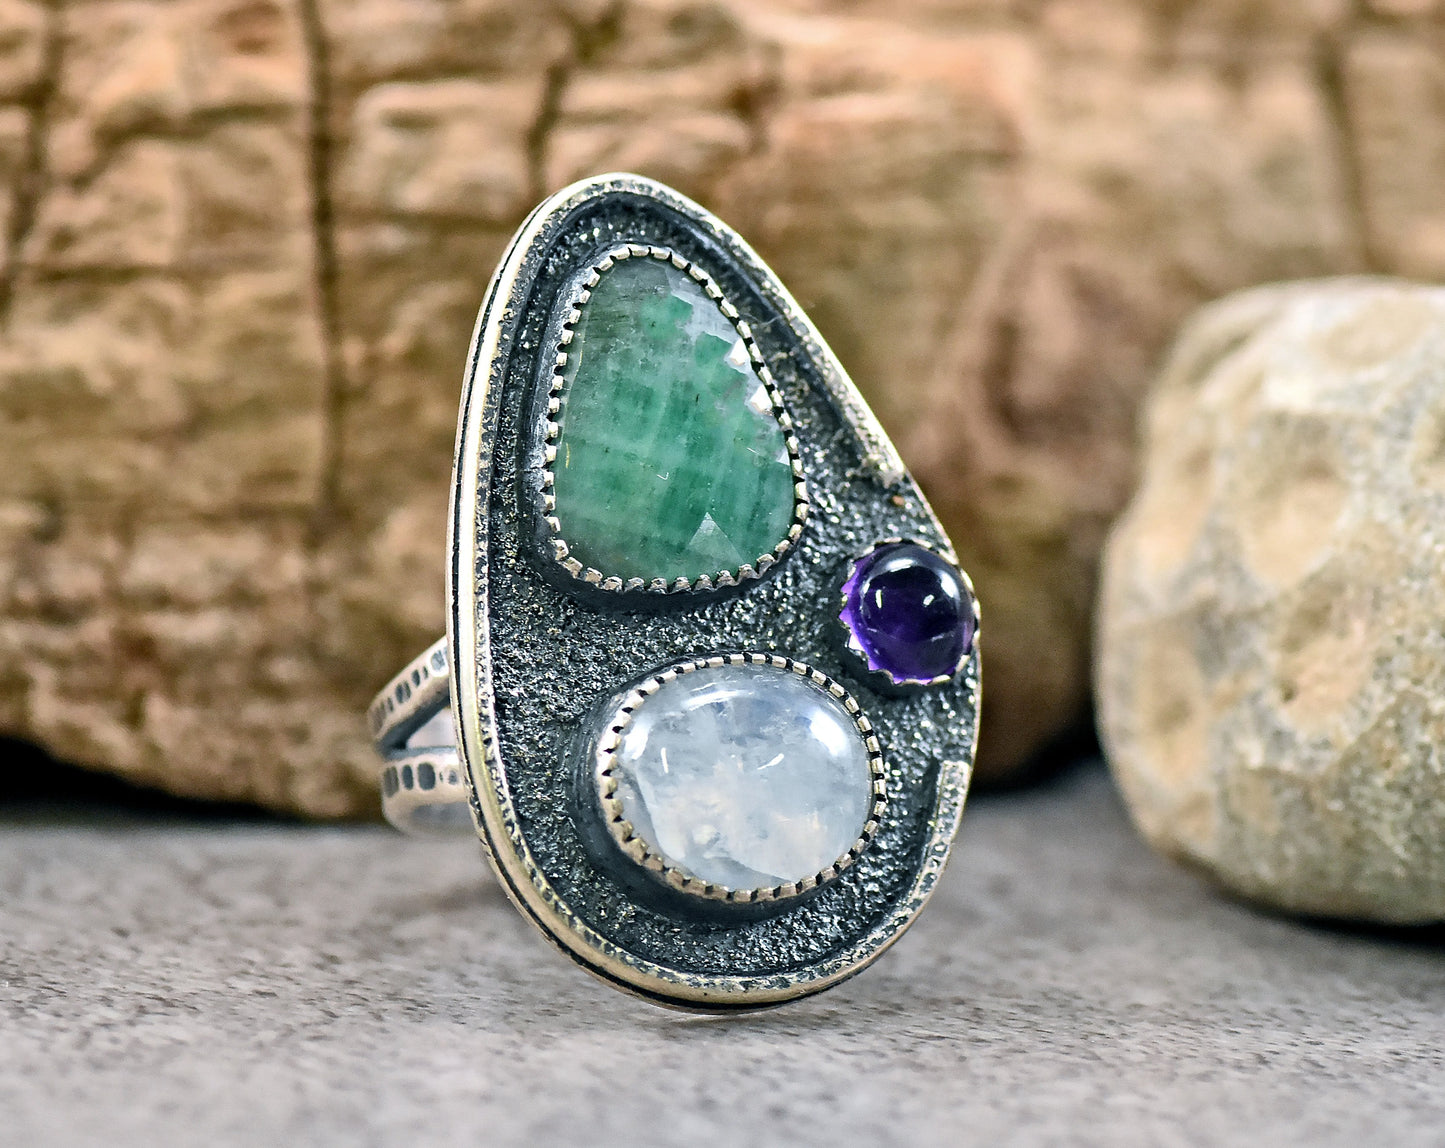 Sterling Silver Statement Ring with Faceted Emerald, Rainbow Moonstone and Amethyst, Size 7.5